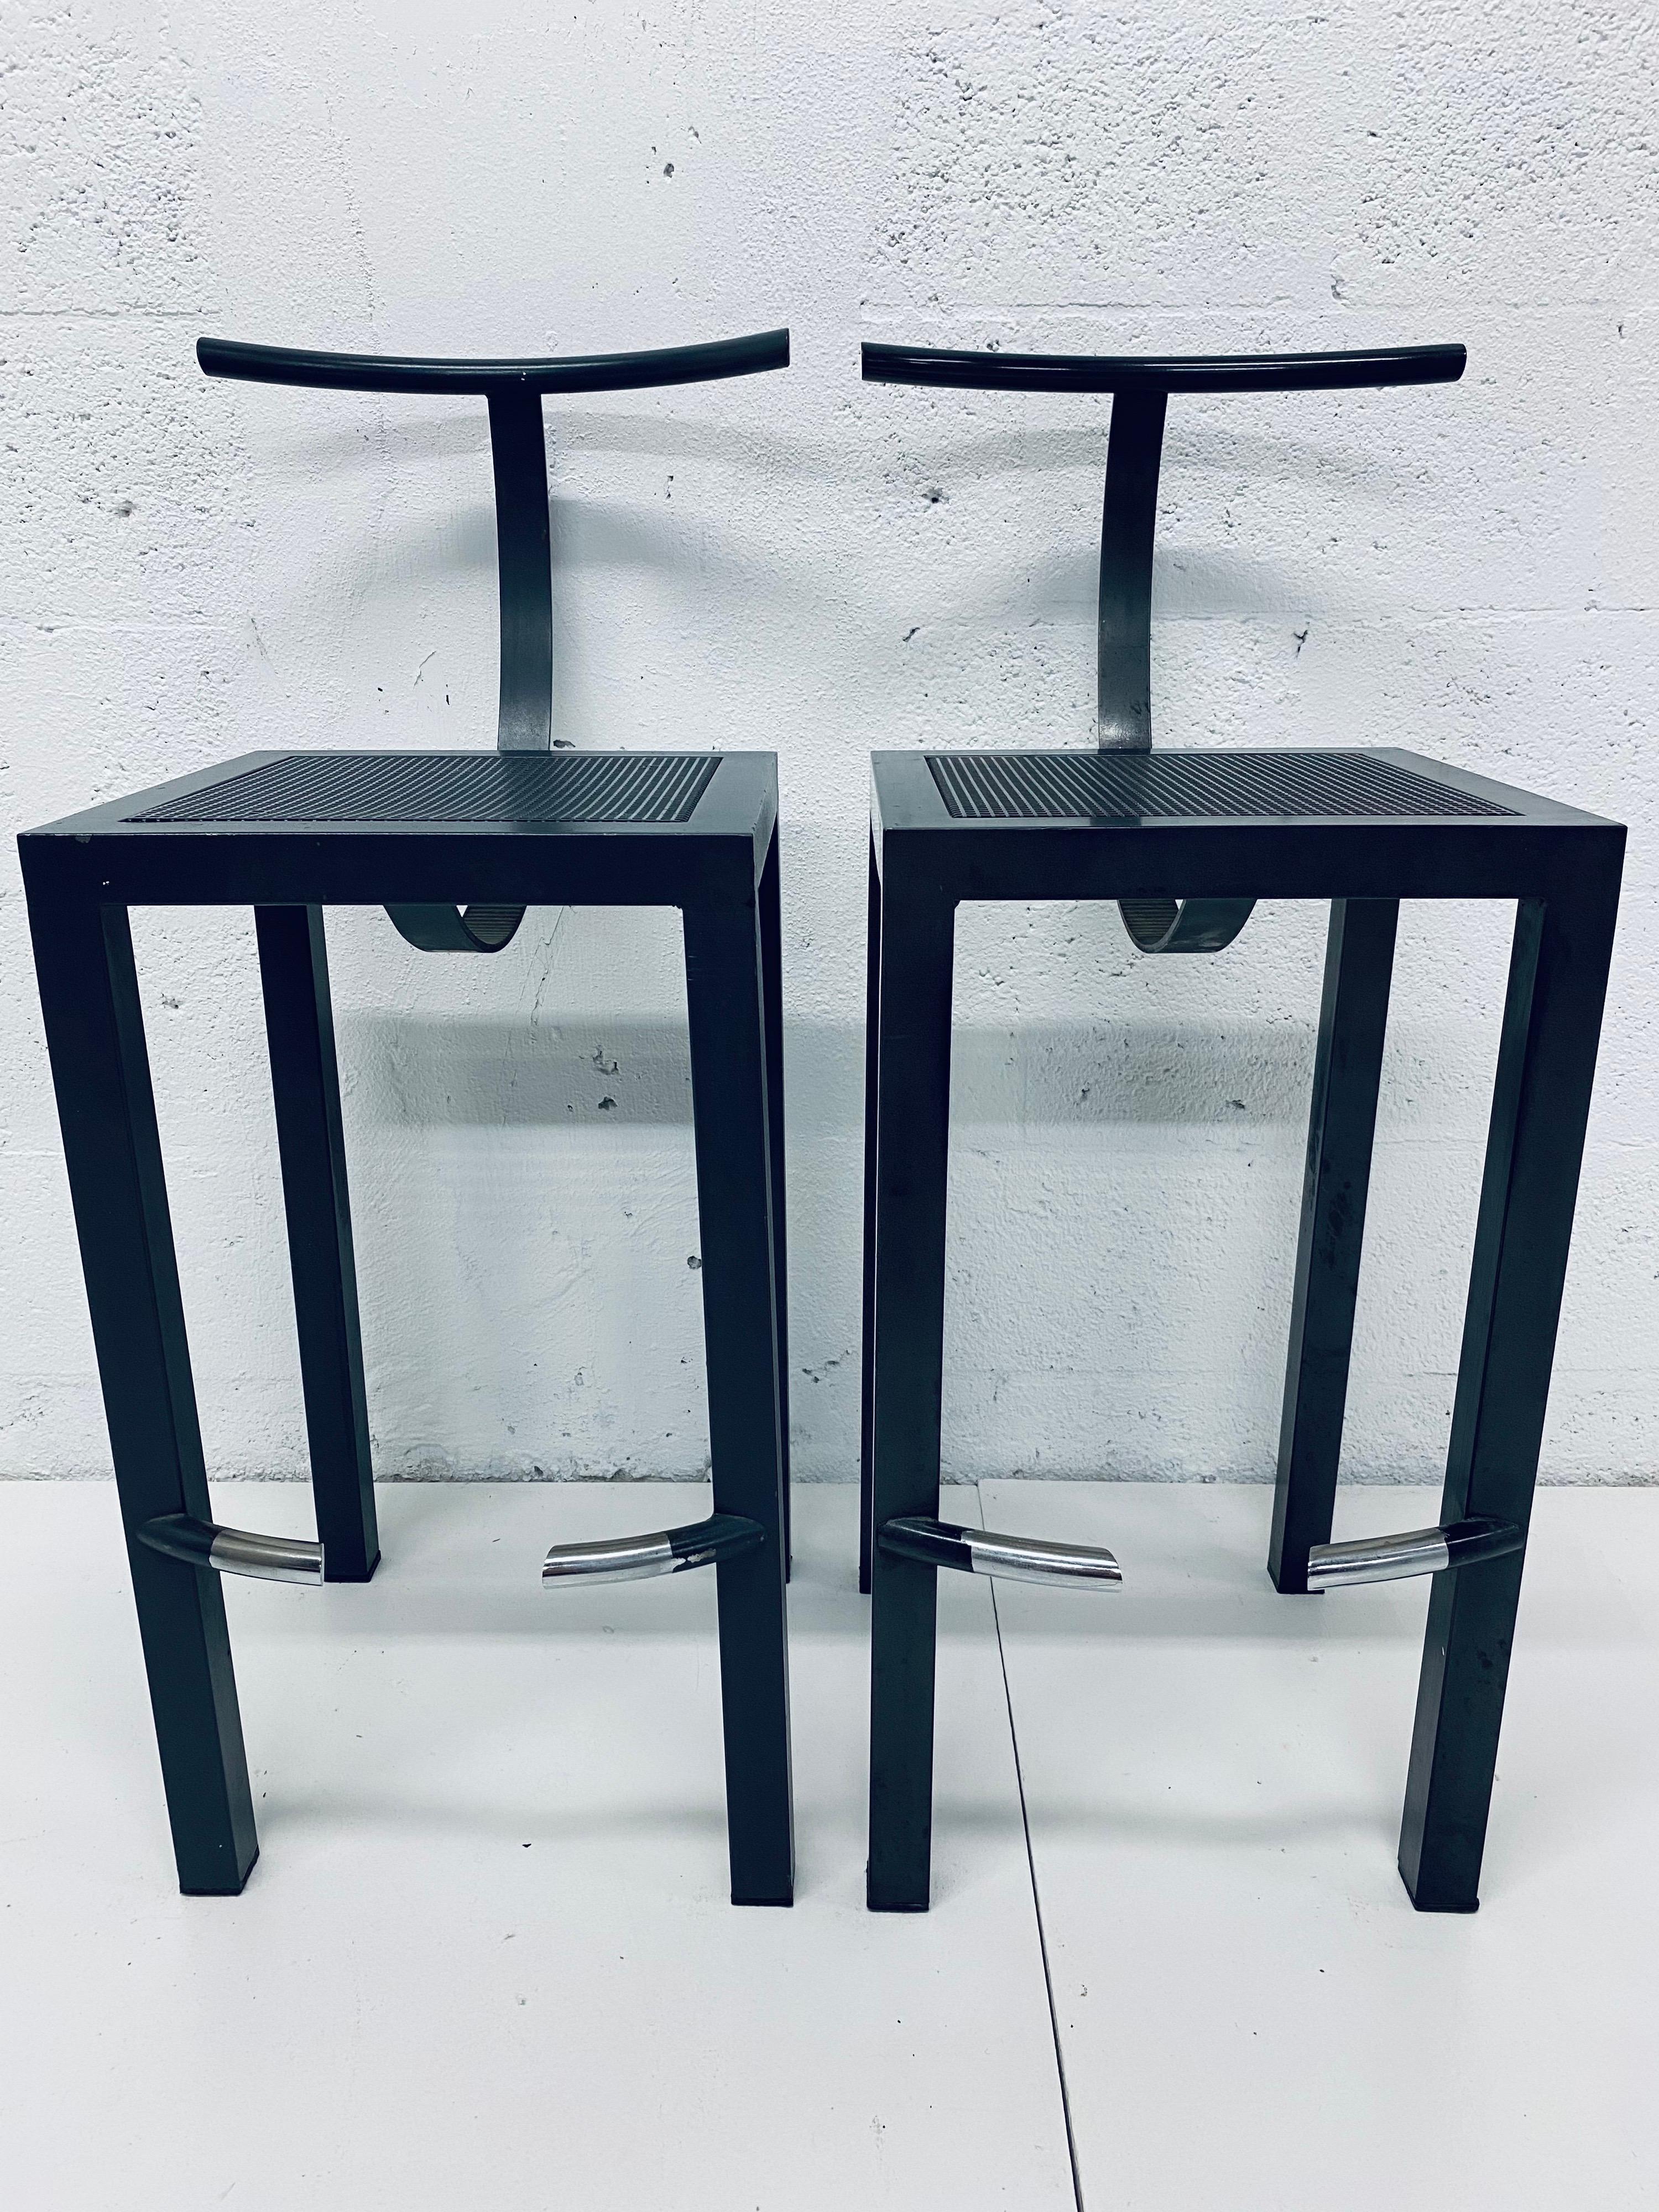 Pair of Postmodern black steel bar stools with perforated steel seats designed by Philippe Starck for his studio Aleph Ubik and manufactured by Driade, Italy, 1980s.